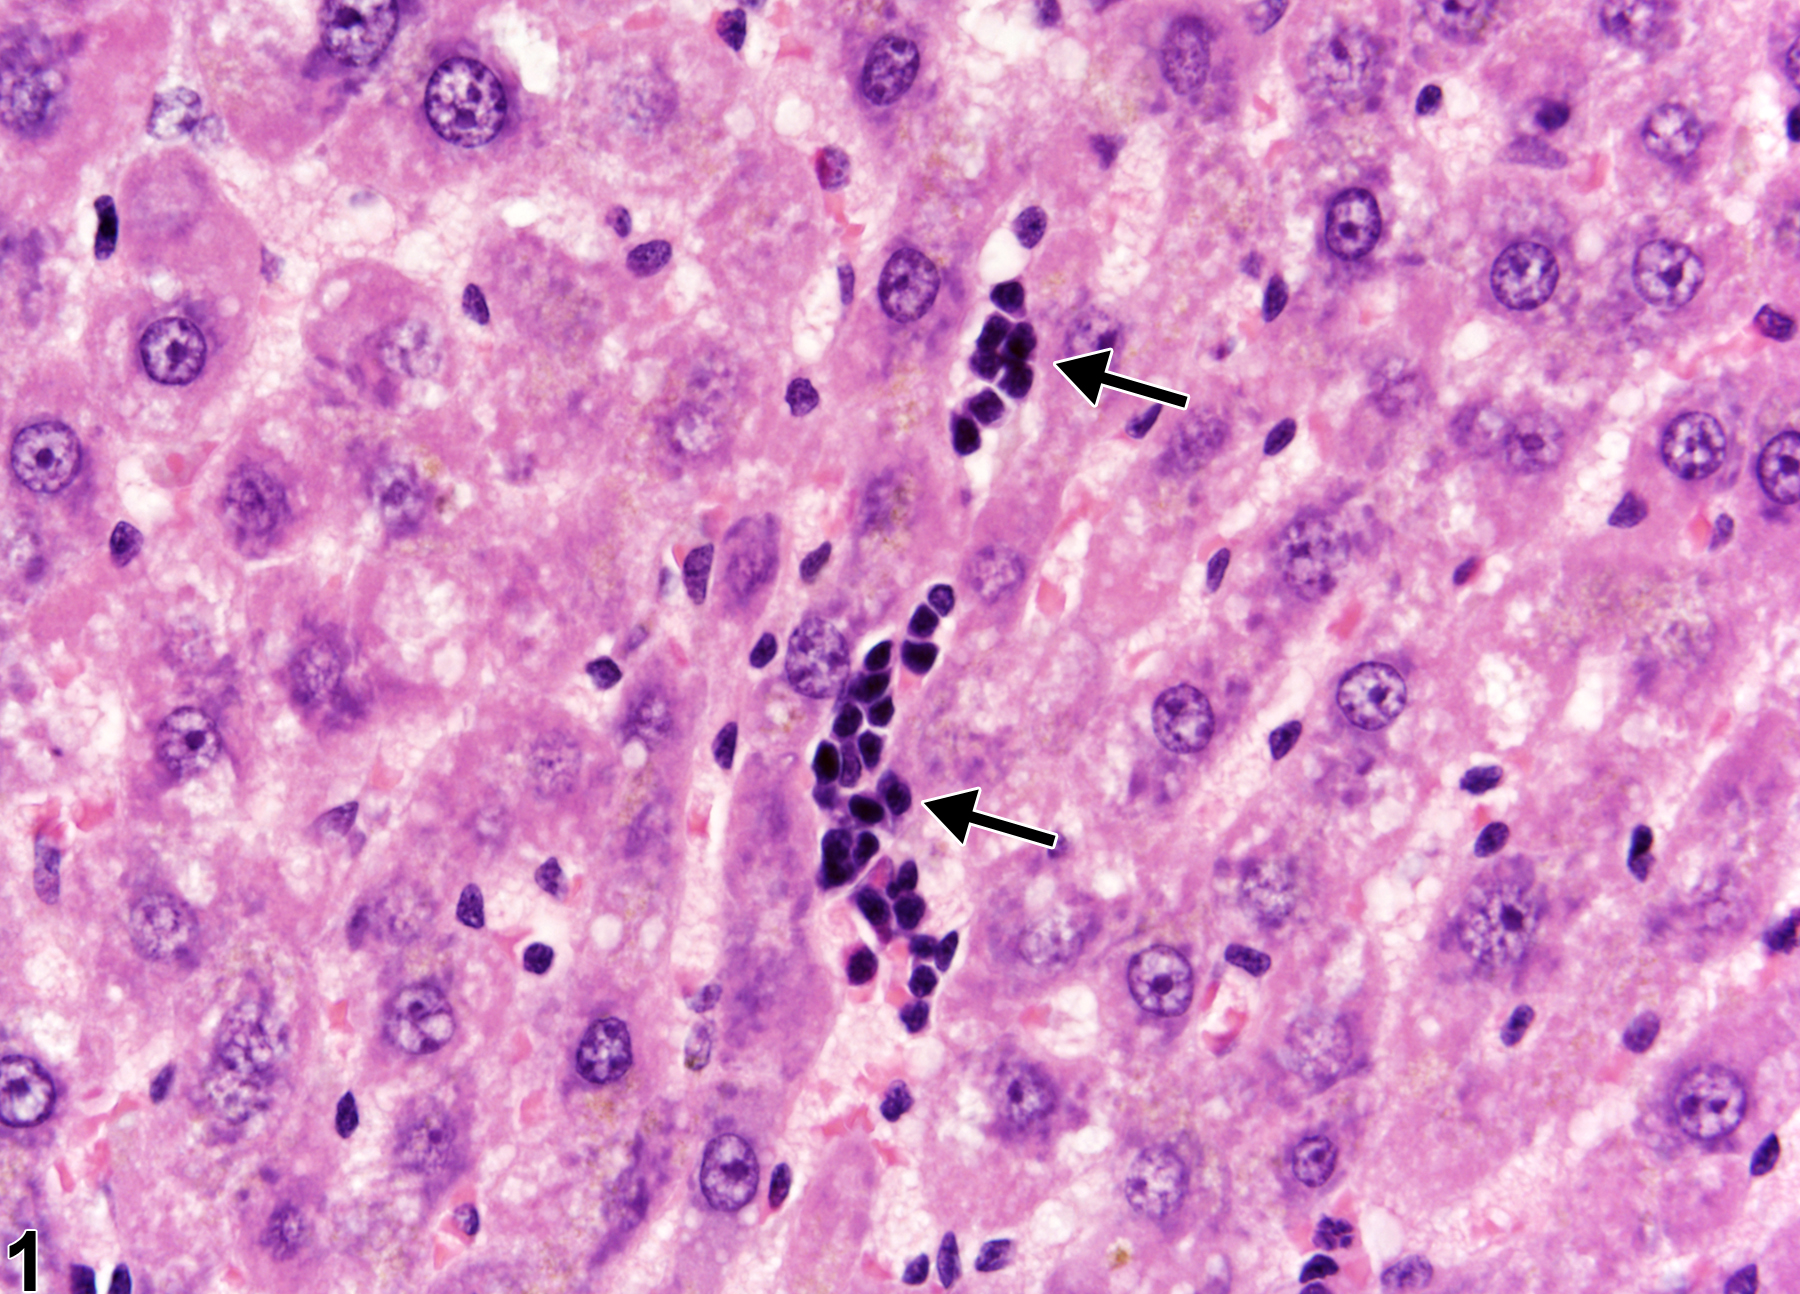 Image of extramedullary hematopoiesis in the liver from a female Harlan Sprague-Dawley rat in a chronic study